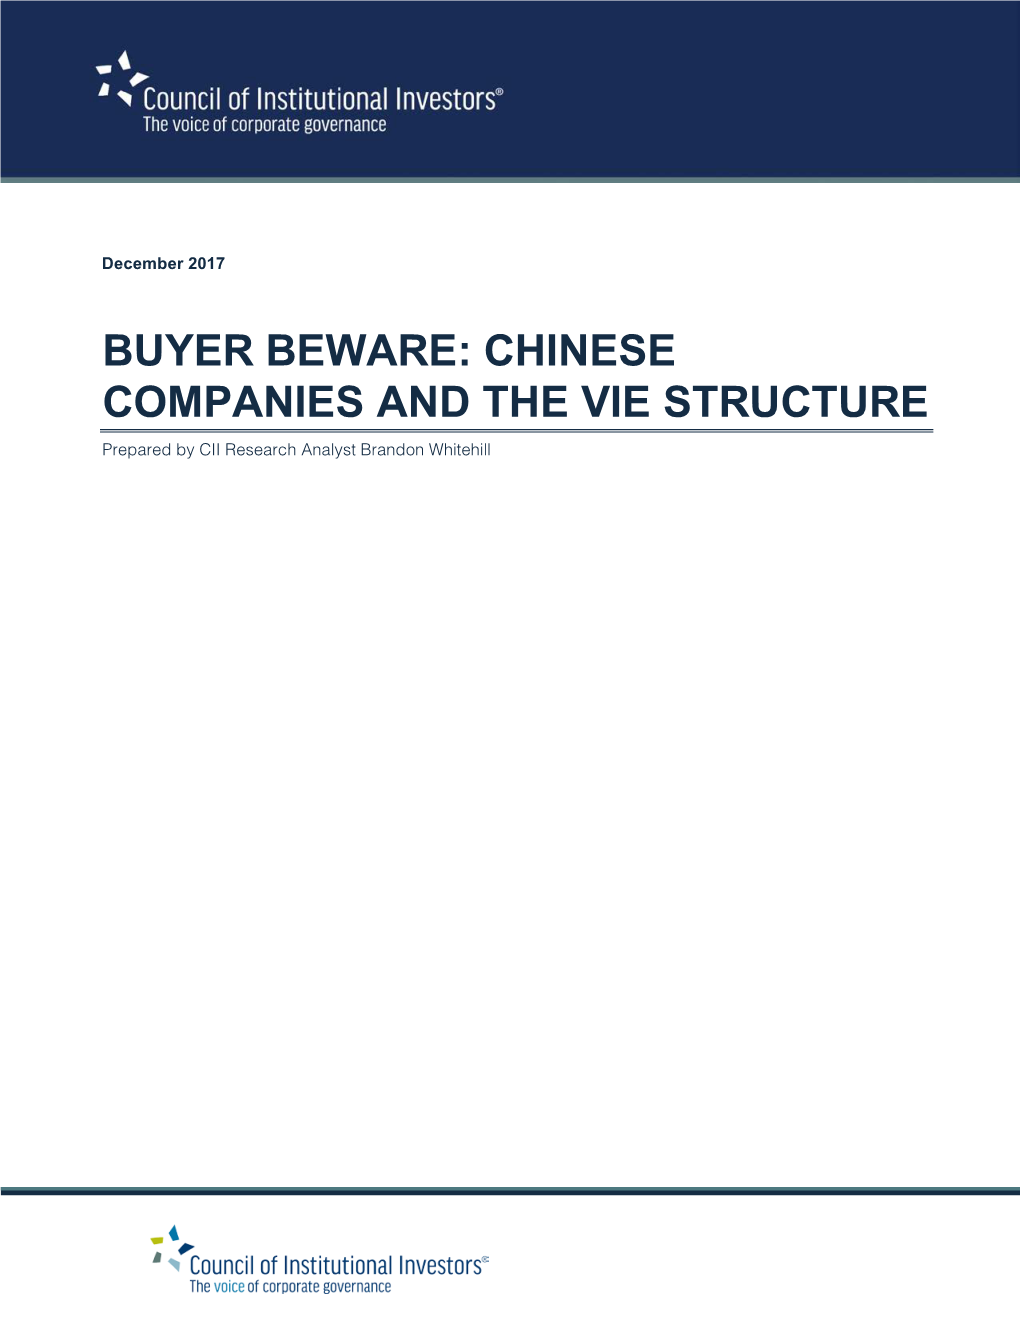 CHINESE COMPANIES and the VIE STRUCTURE Prepared by CII Research Analyst Brandon Whitehill